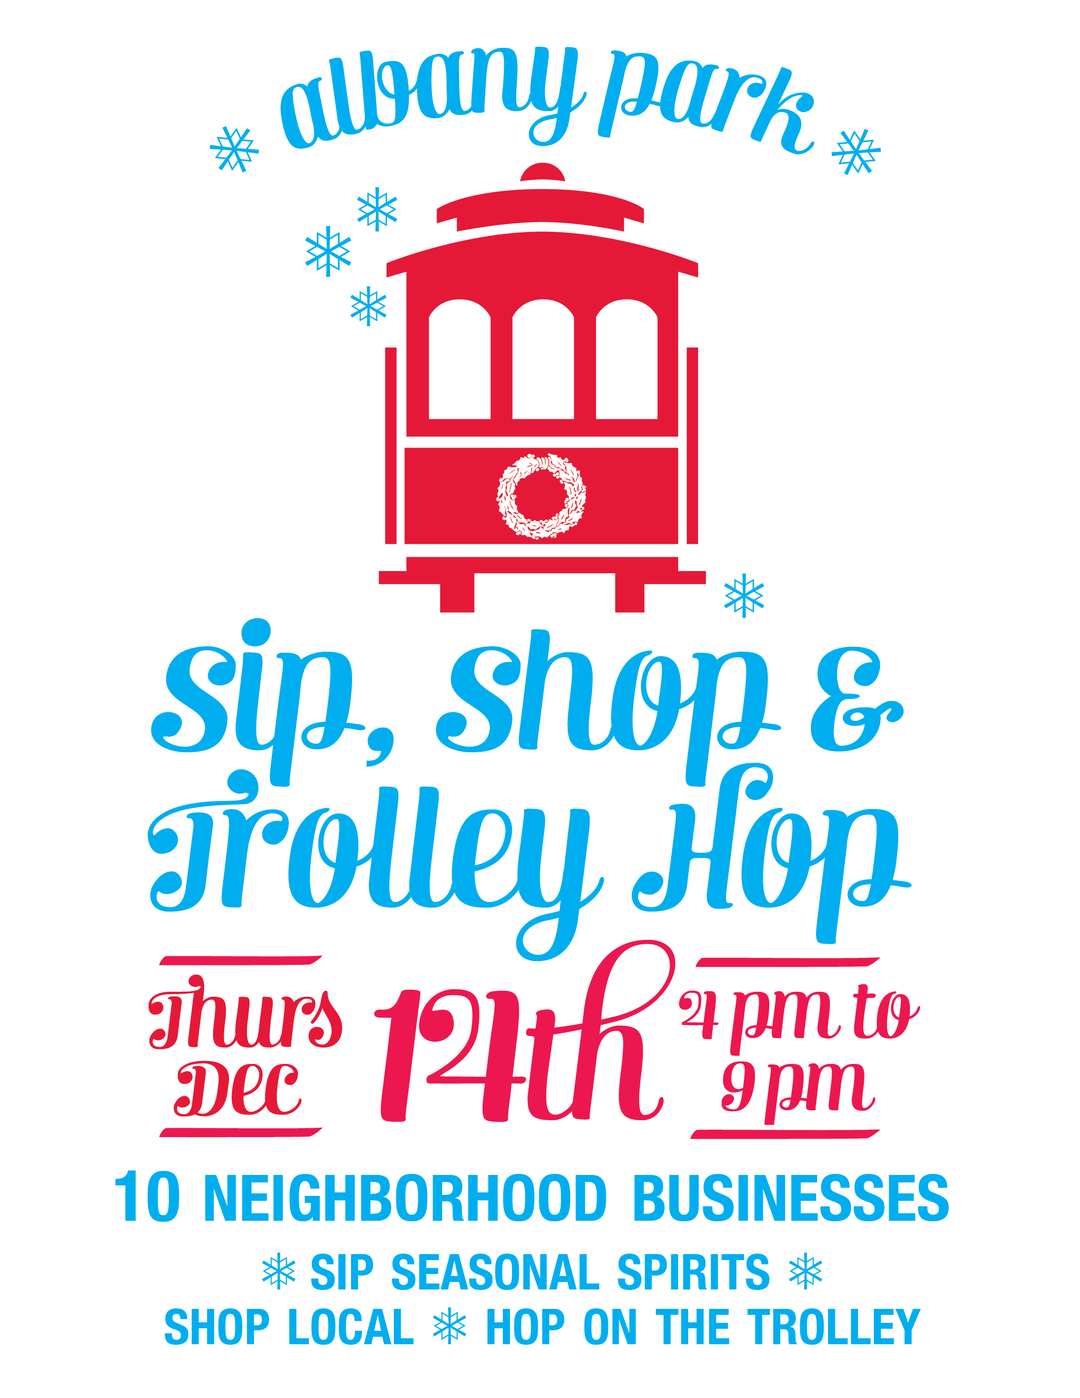 albany park's first sip, shop & trolley hop